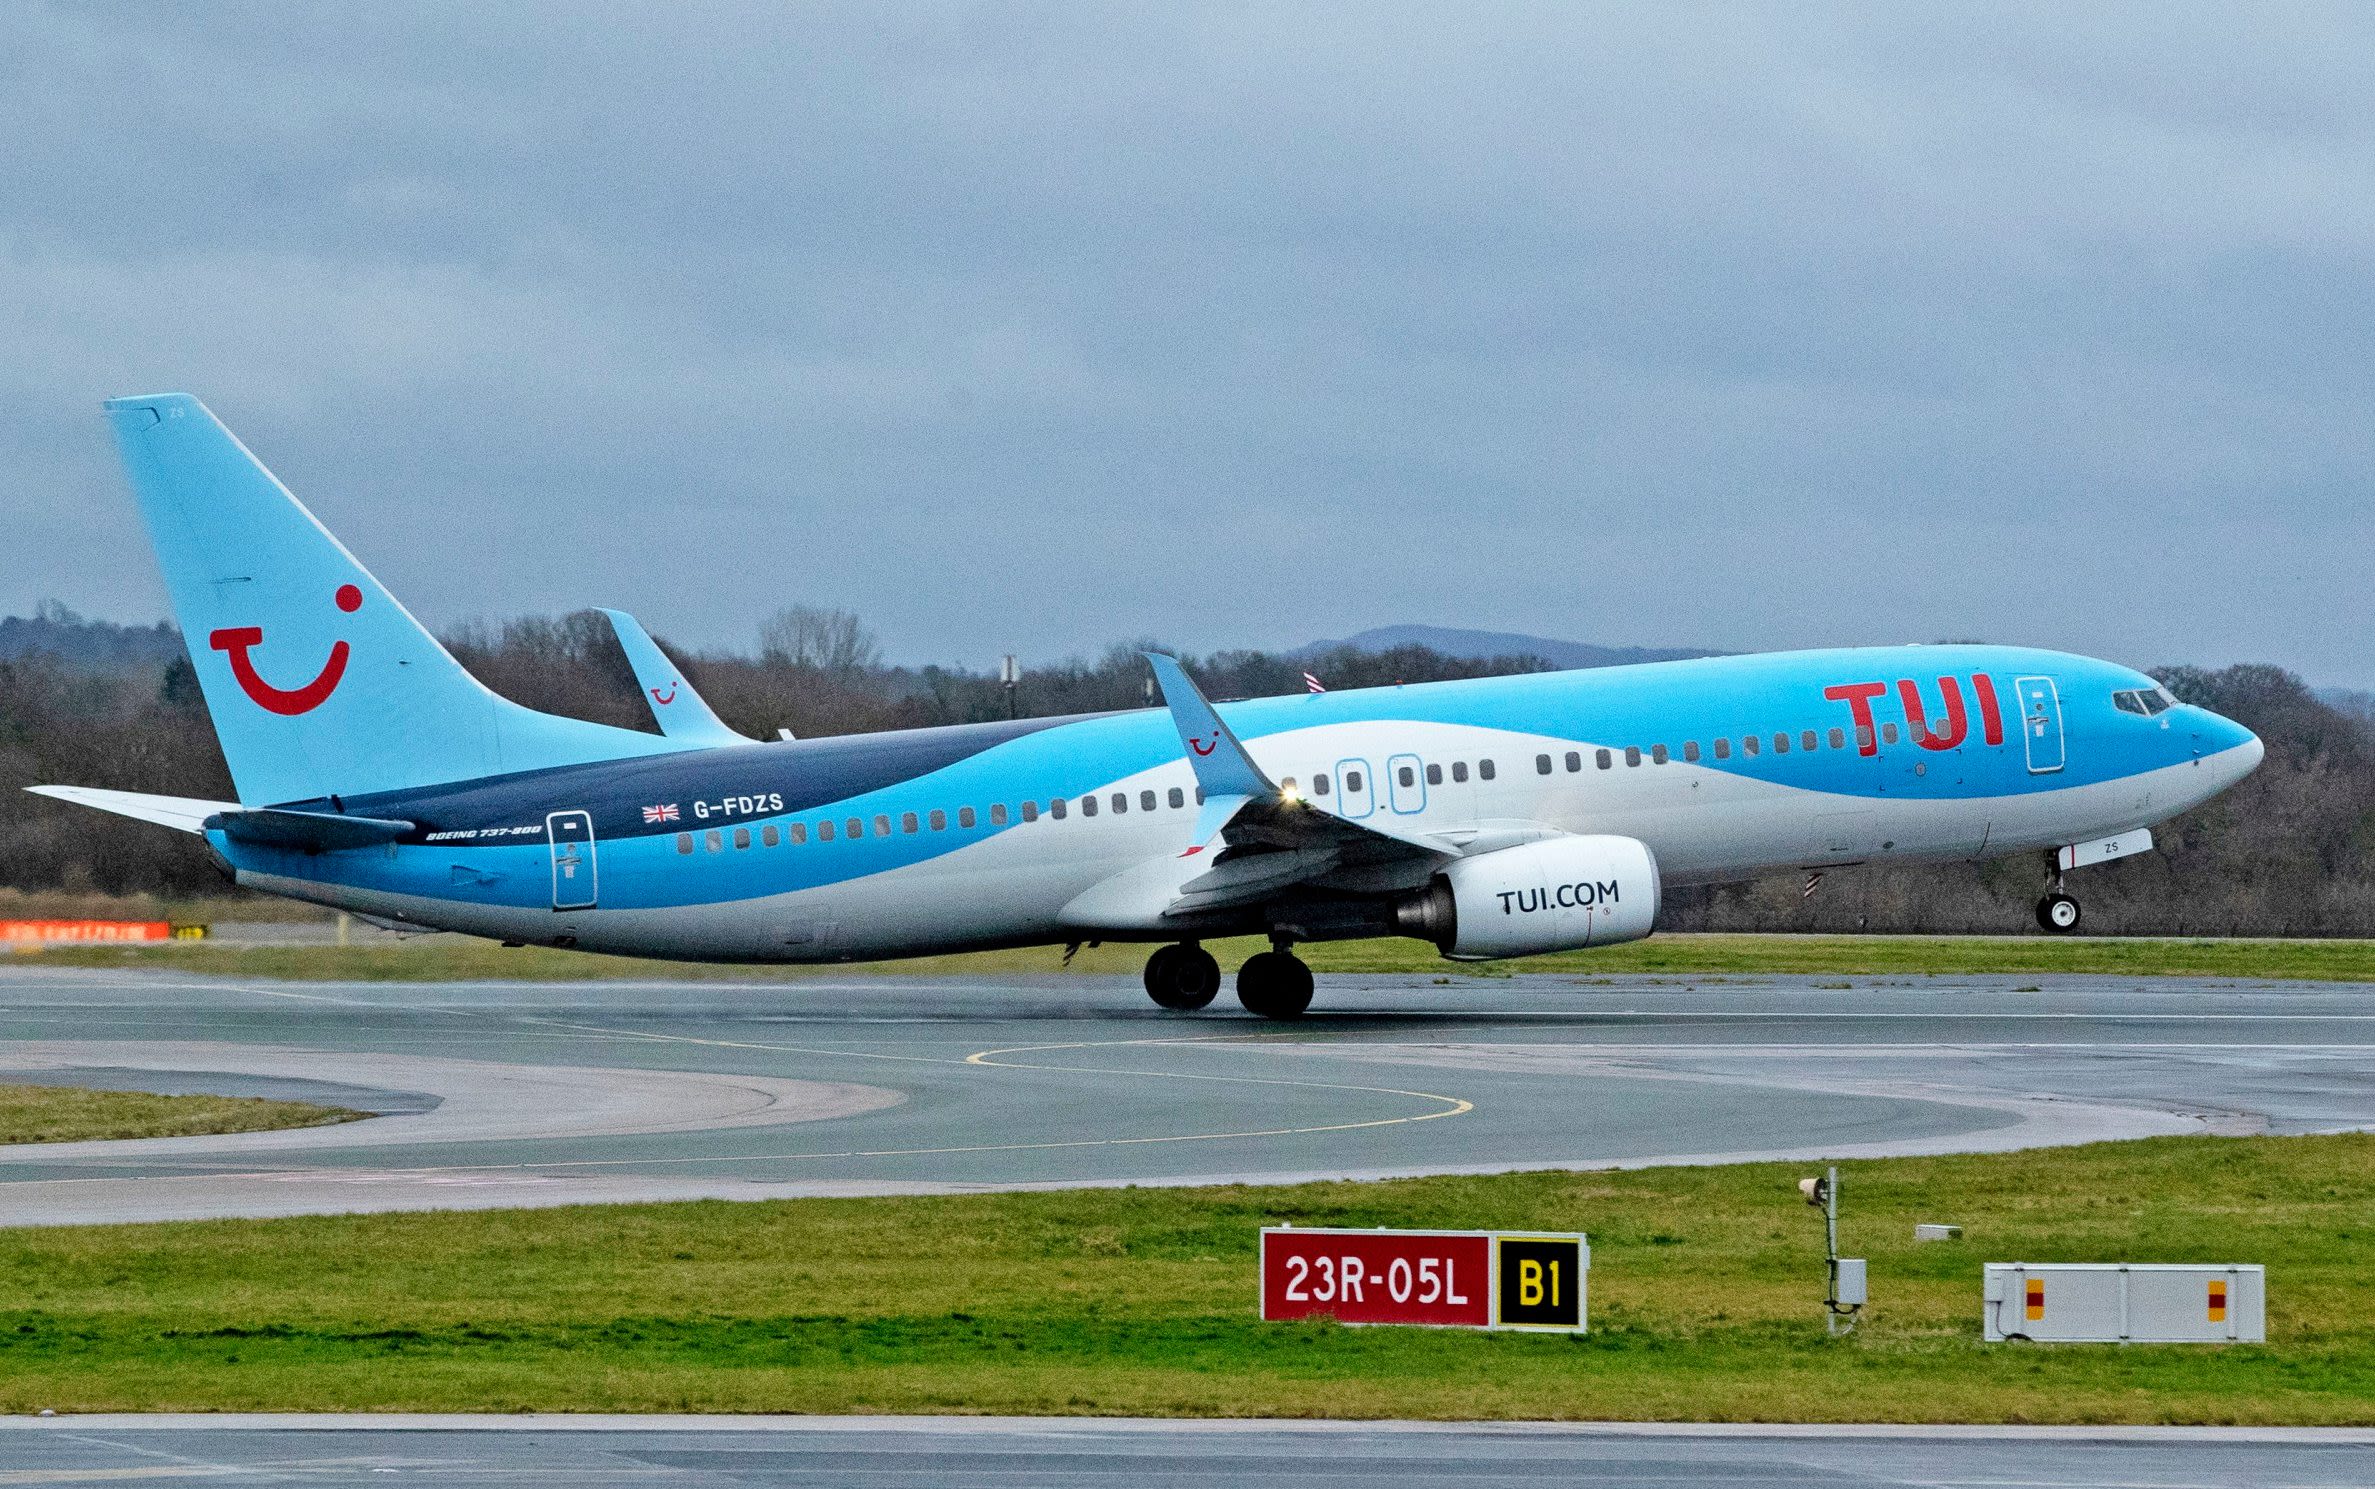 Boeing 737 took off from Bristol ‘with just three seconds of runway left’